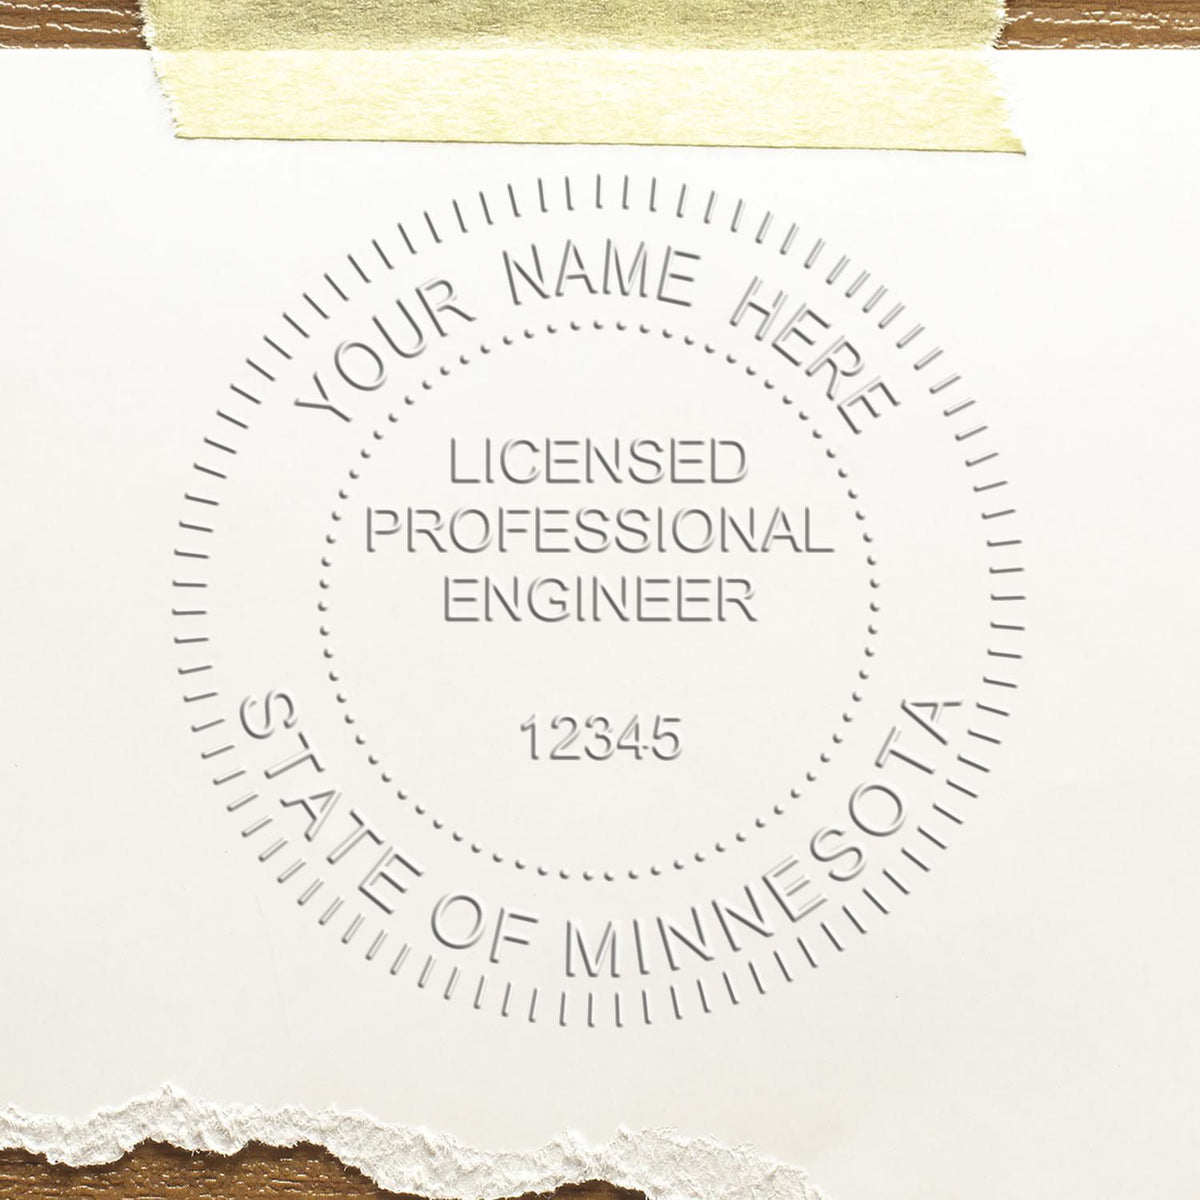 A stamped impression of the Long Reach Minnesota PE Seal in this stylish lifestyle photo, setting the tone for a unique and personalized product.